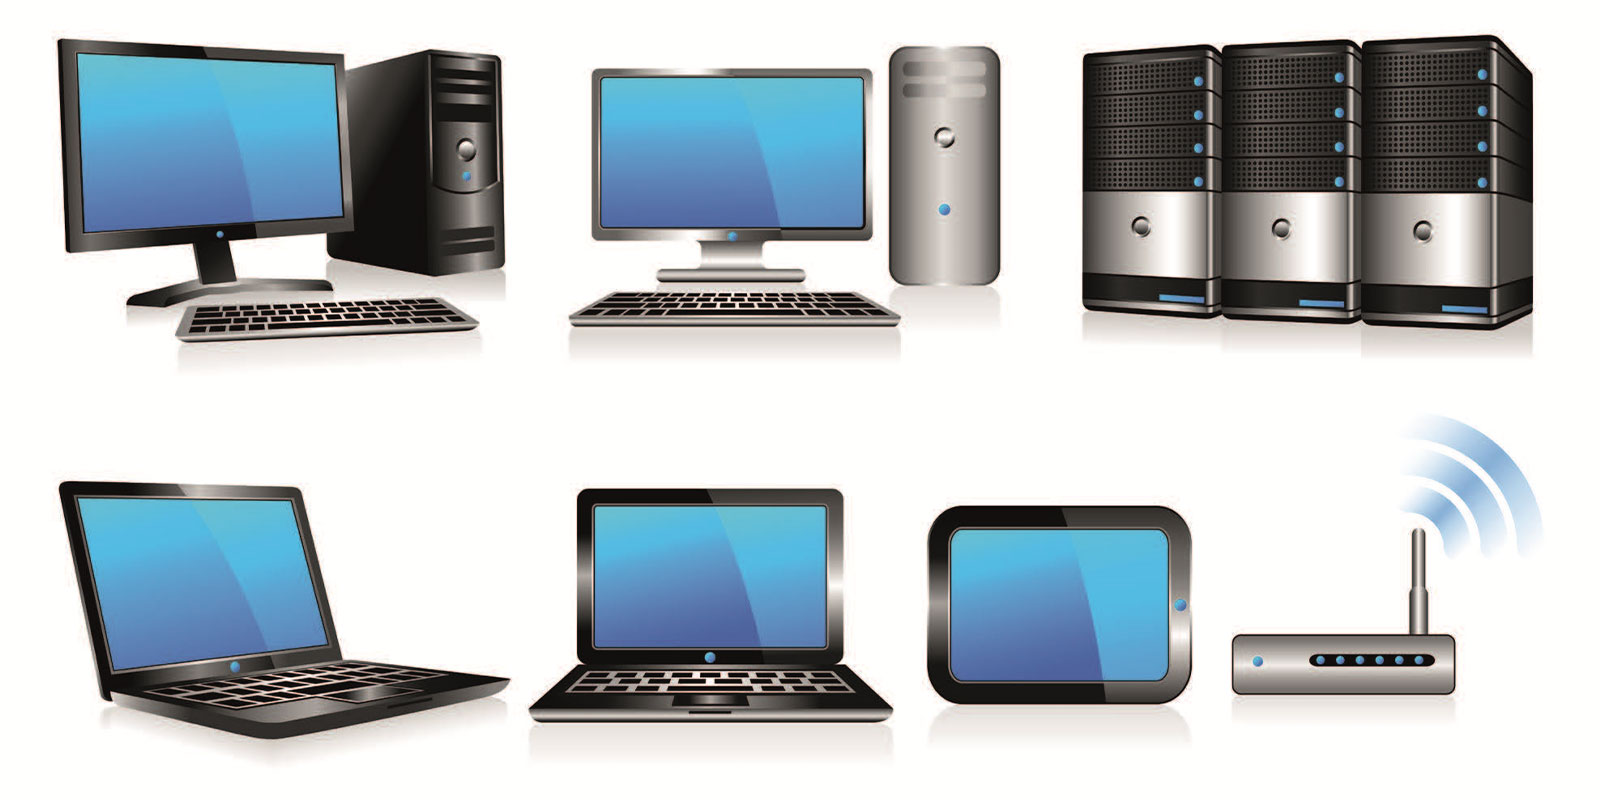 different kinds of devices that can be found in an office